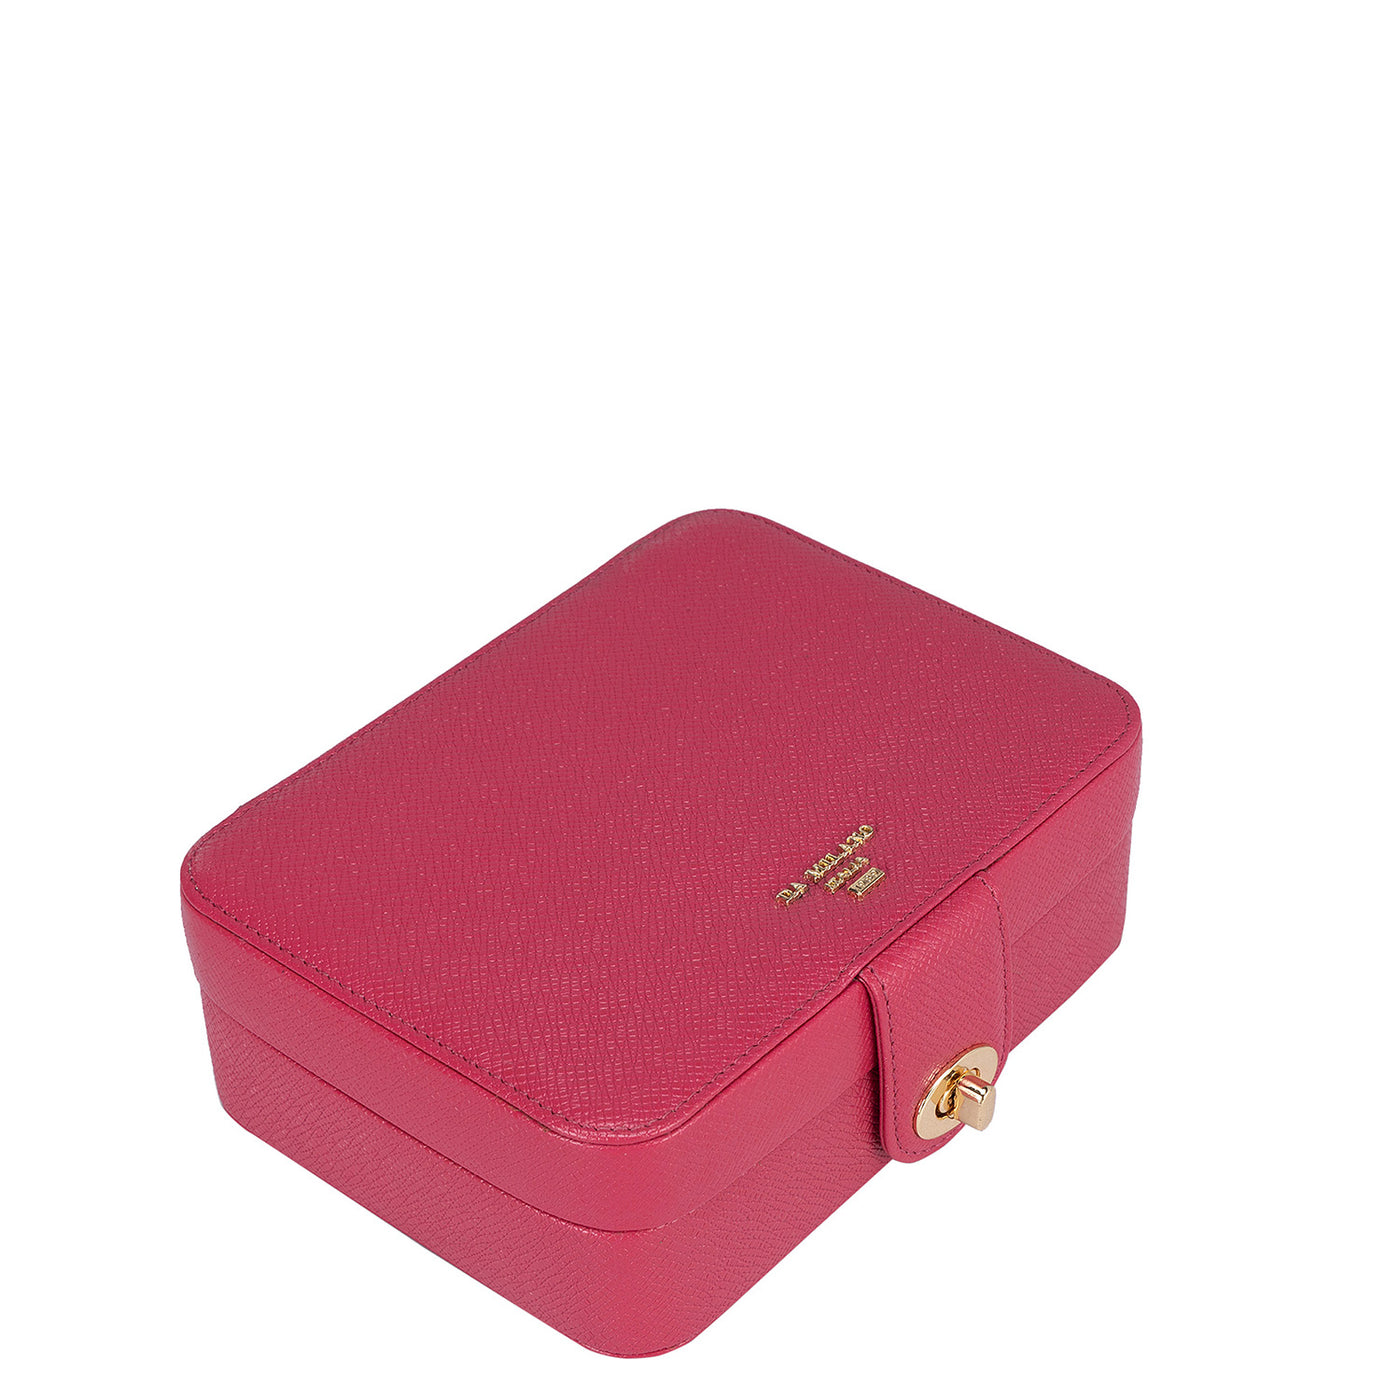 Franzy Leather Jewellery Case - Hot Pink